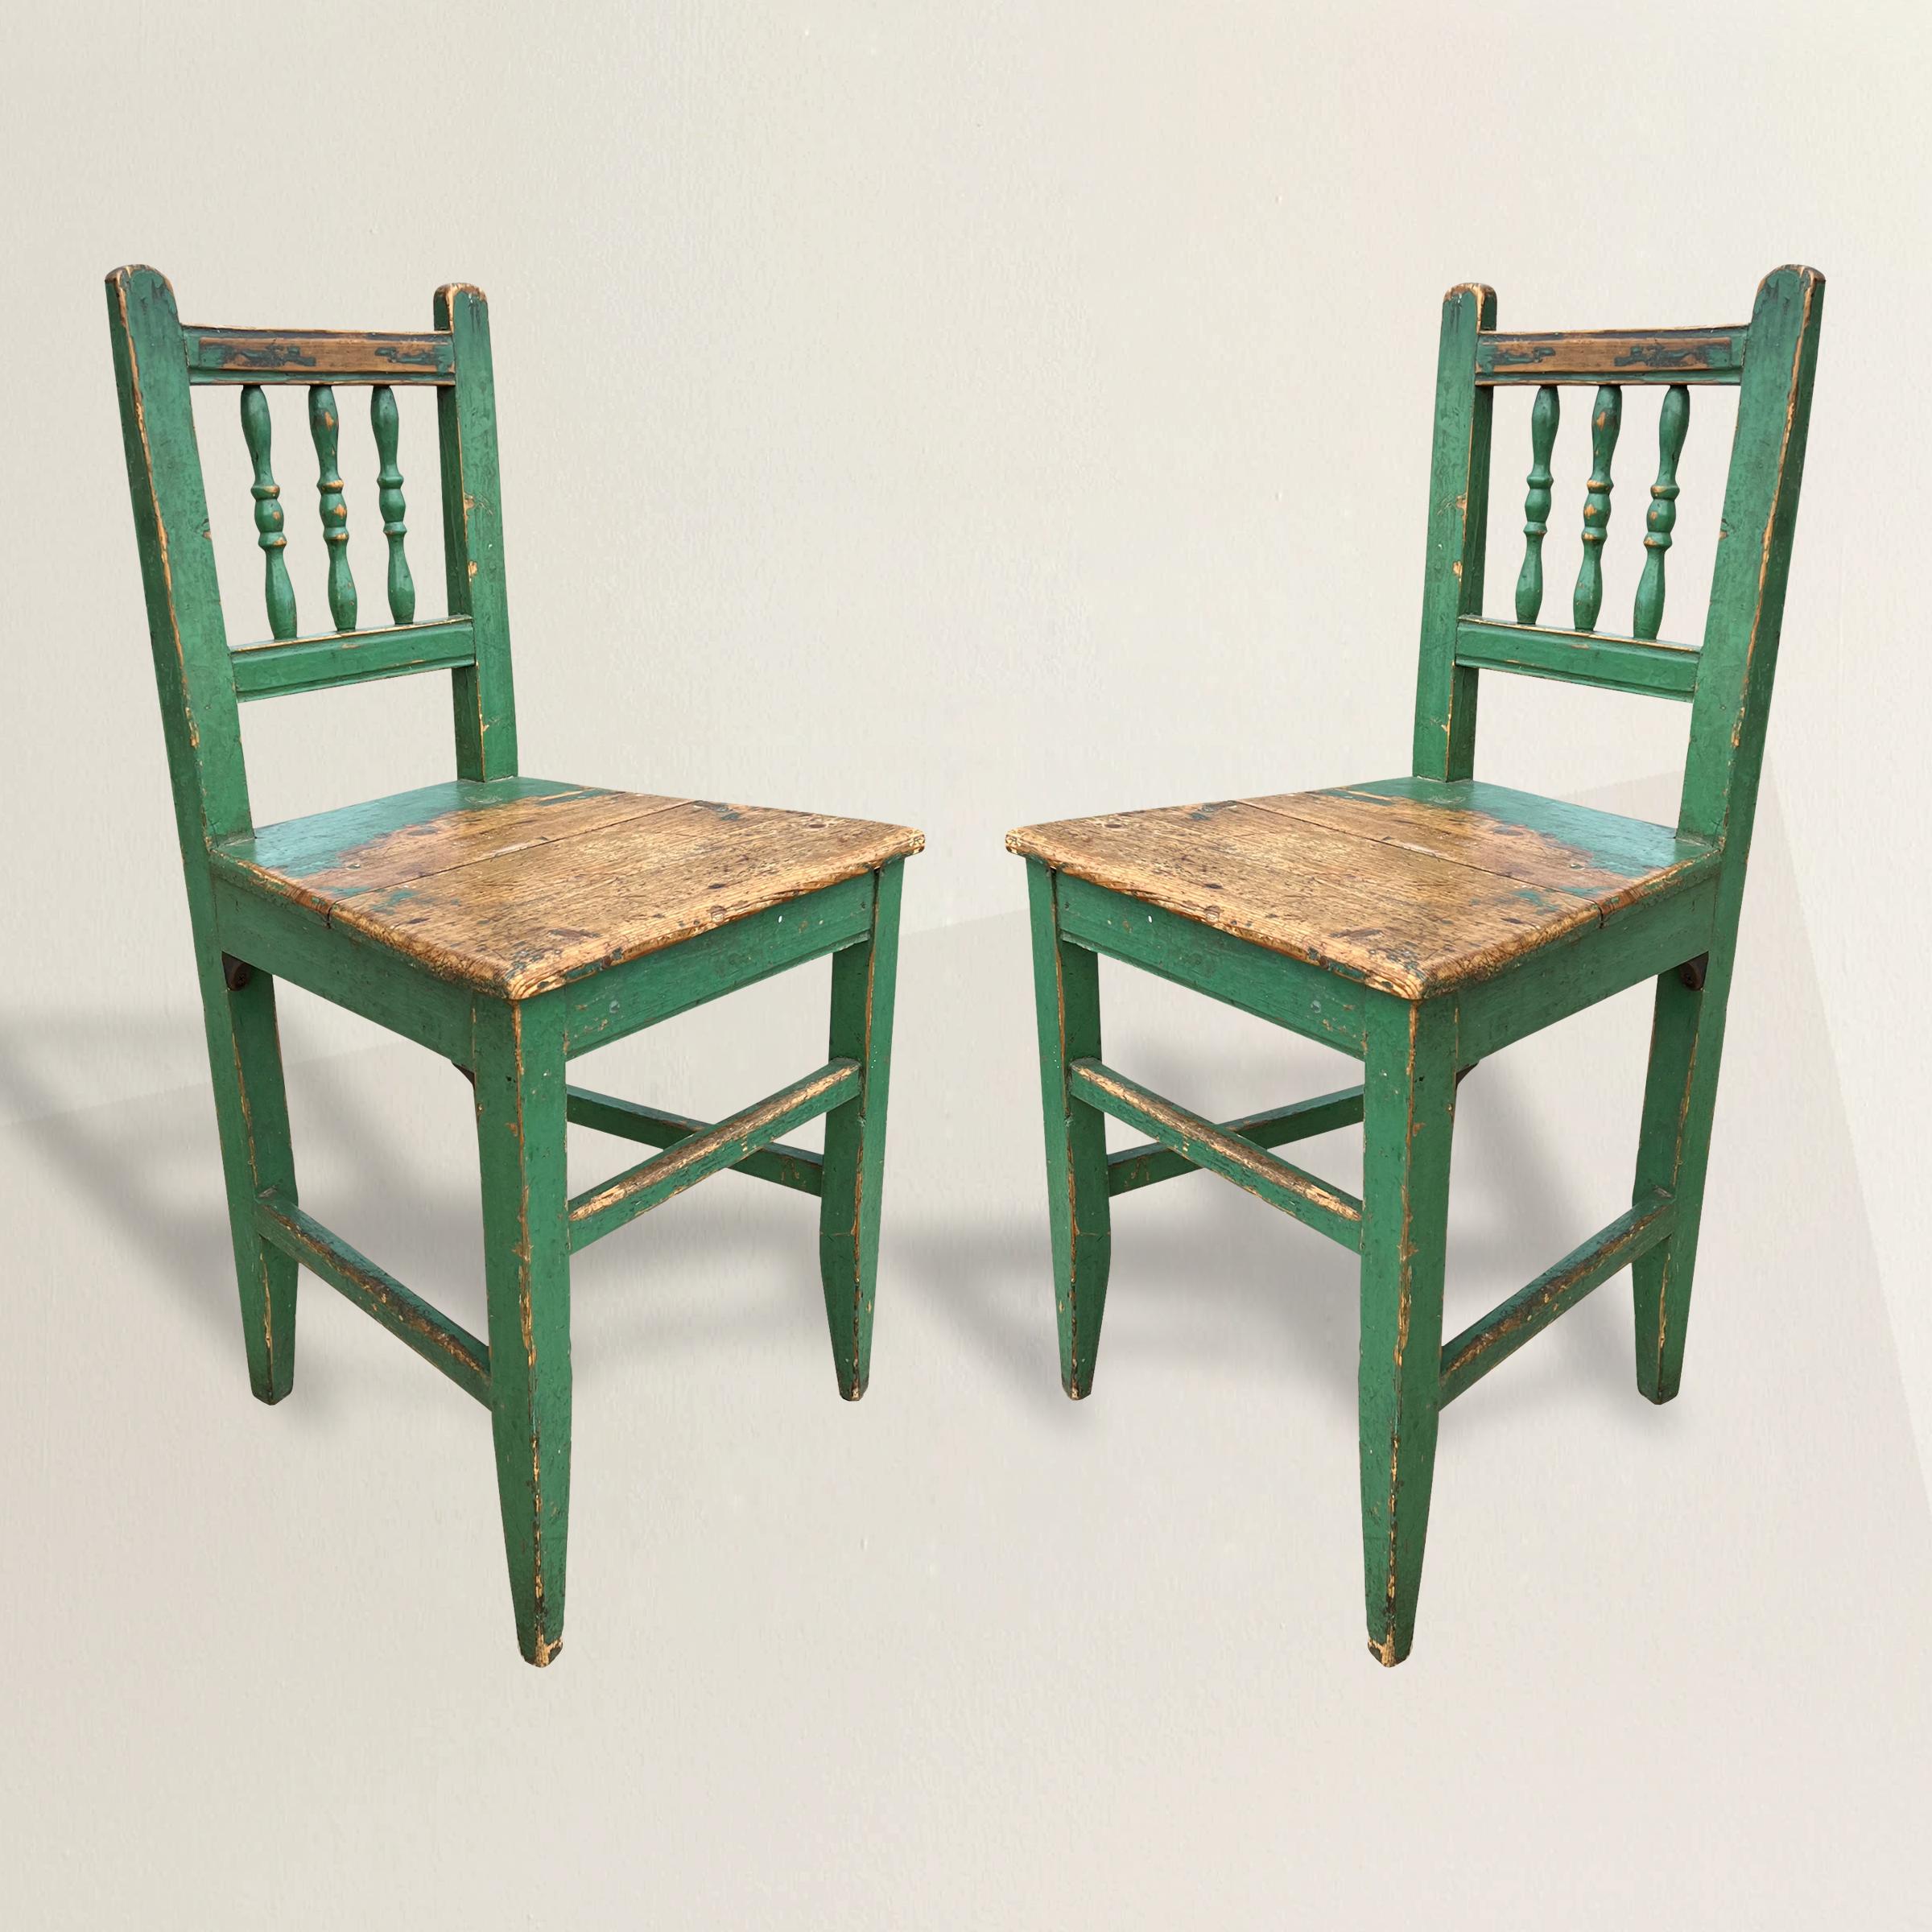 A beautiful pair of 19th century Continental pine farmhouse side chairs with their original green painted finishes and a wonderful patina only time could bestow. The perfect chairs at your breakfast table in your country house, or flanking a console